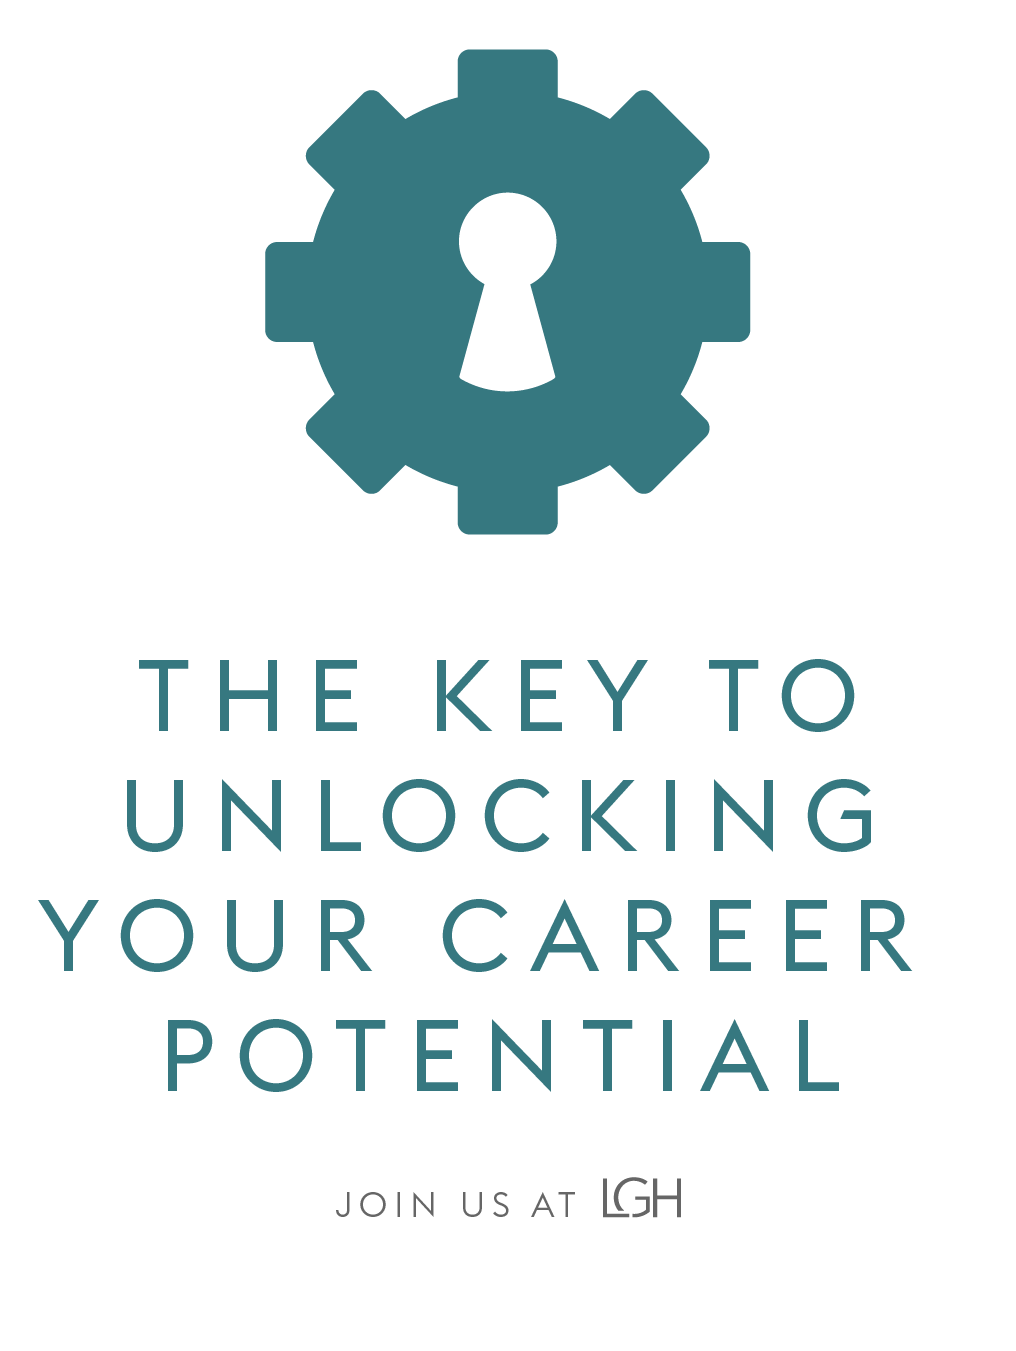 The key to unlocking your career potential